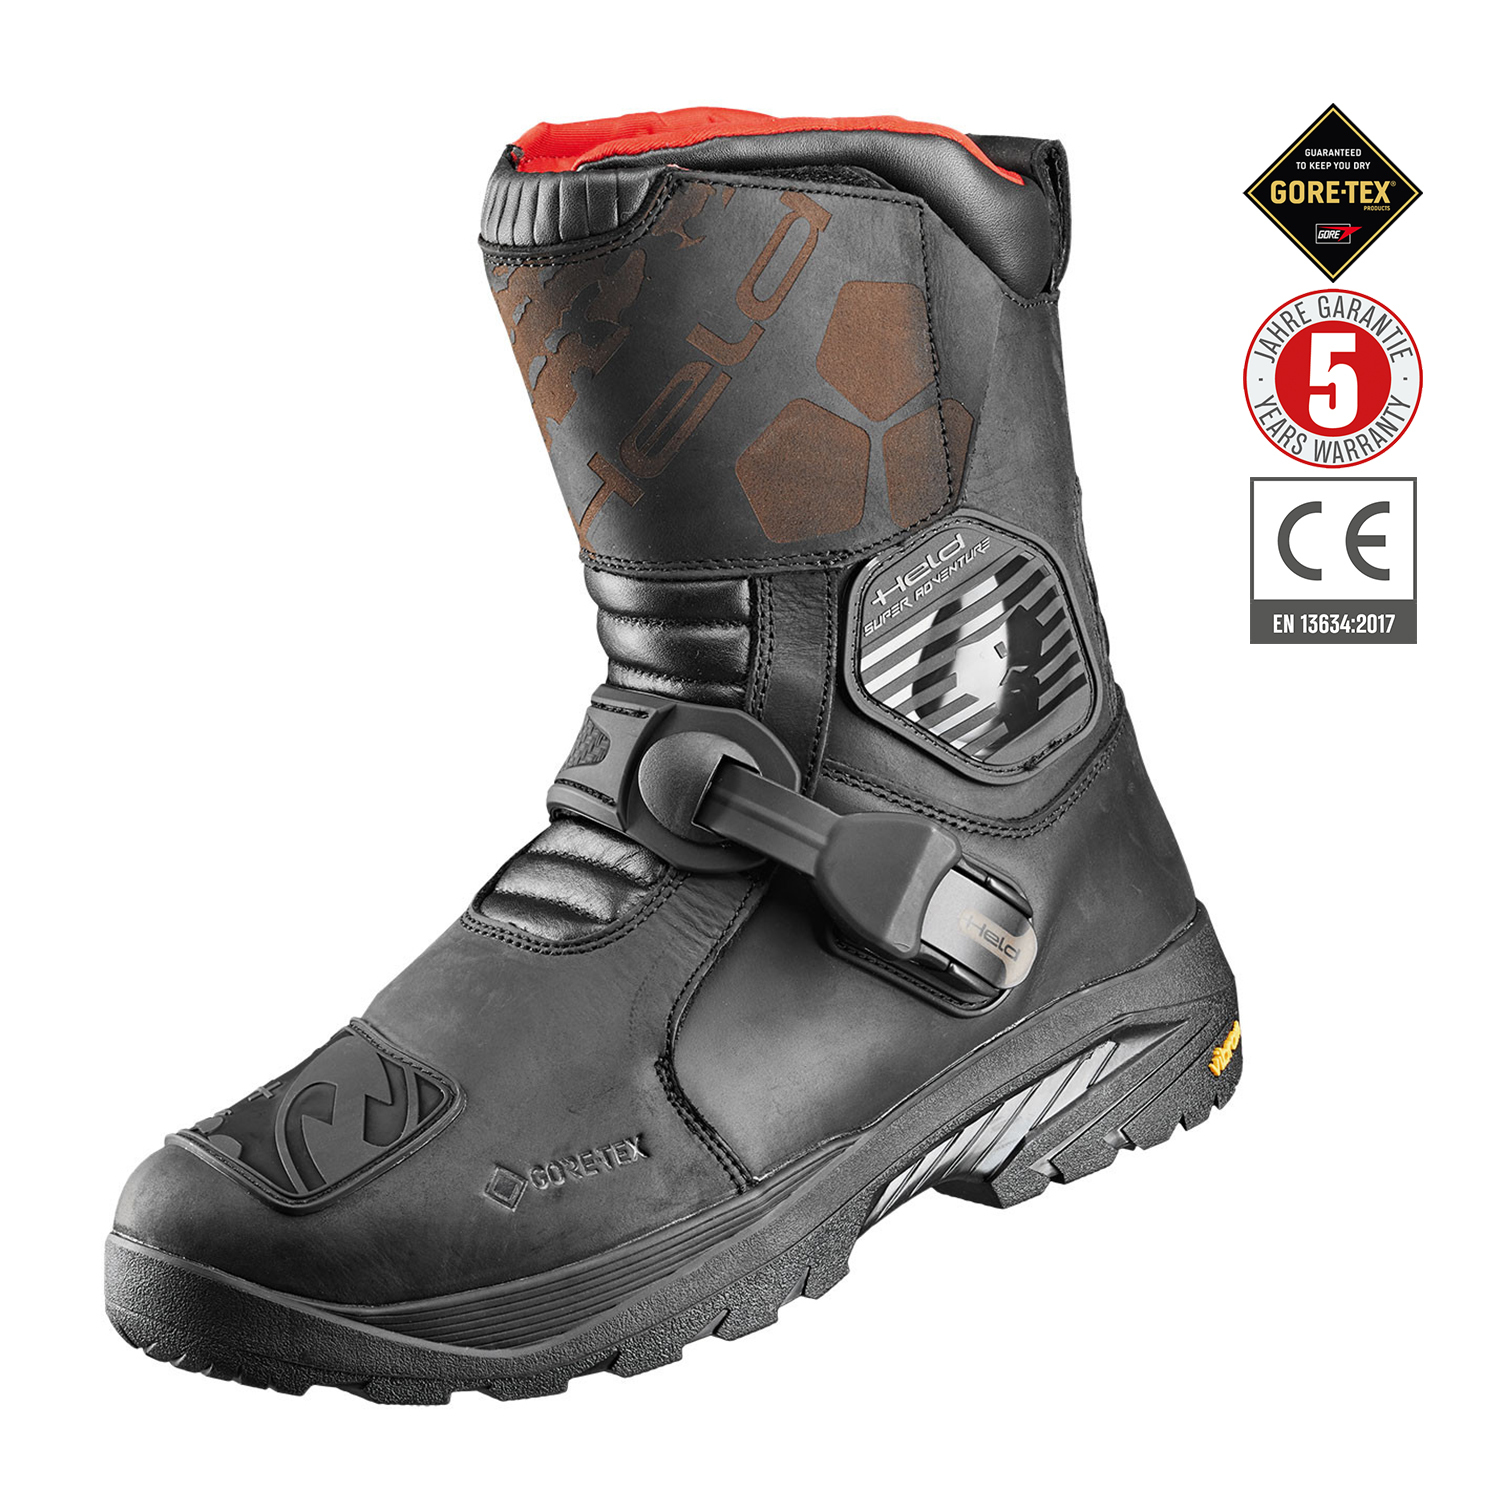 Held Brickland LC Gore-Tex Boots Black - Available in Various Sizes